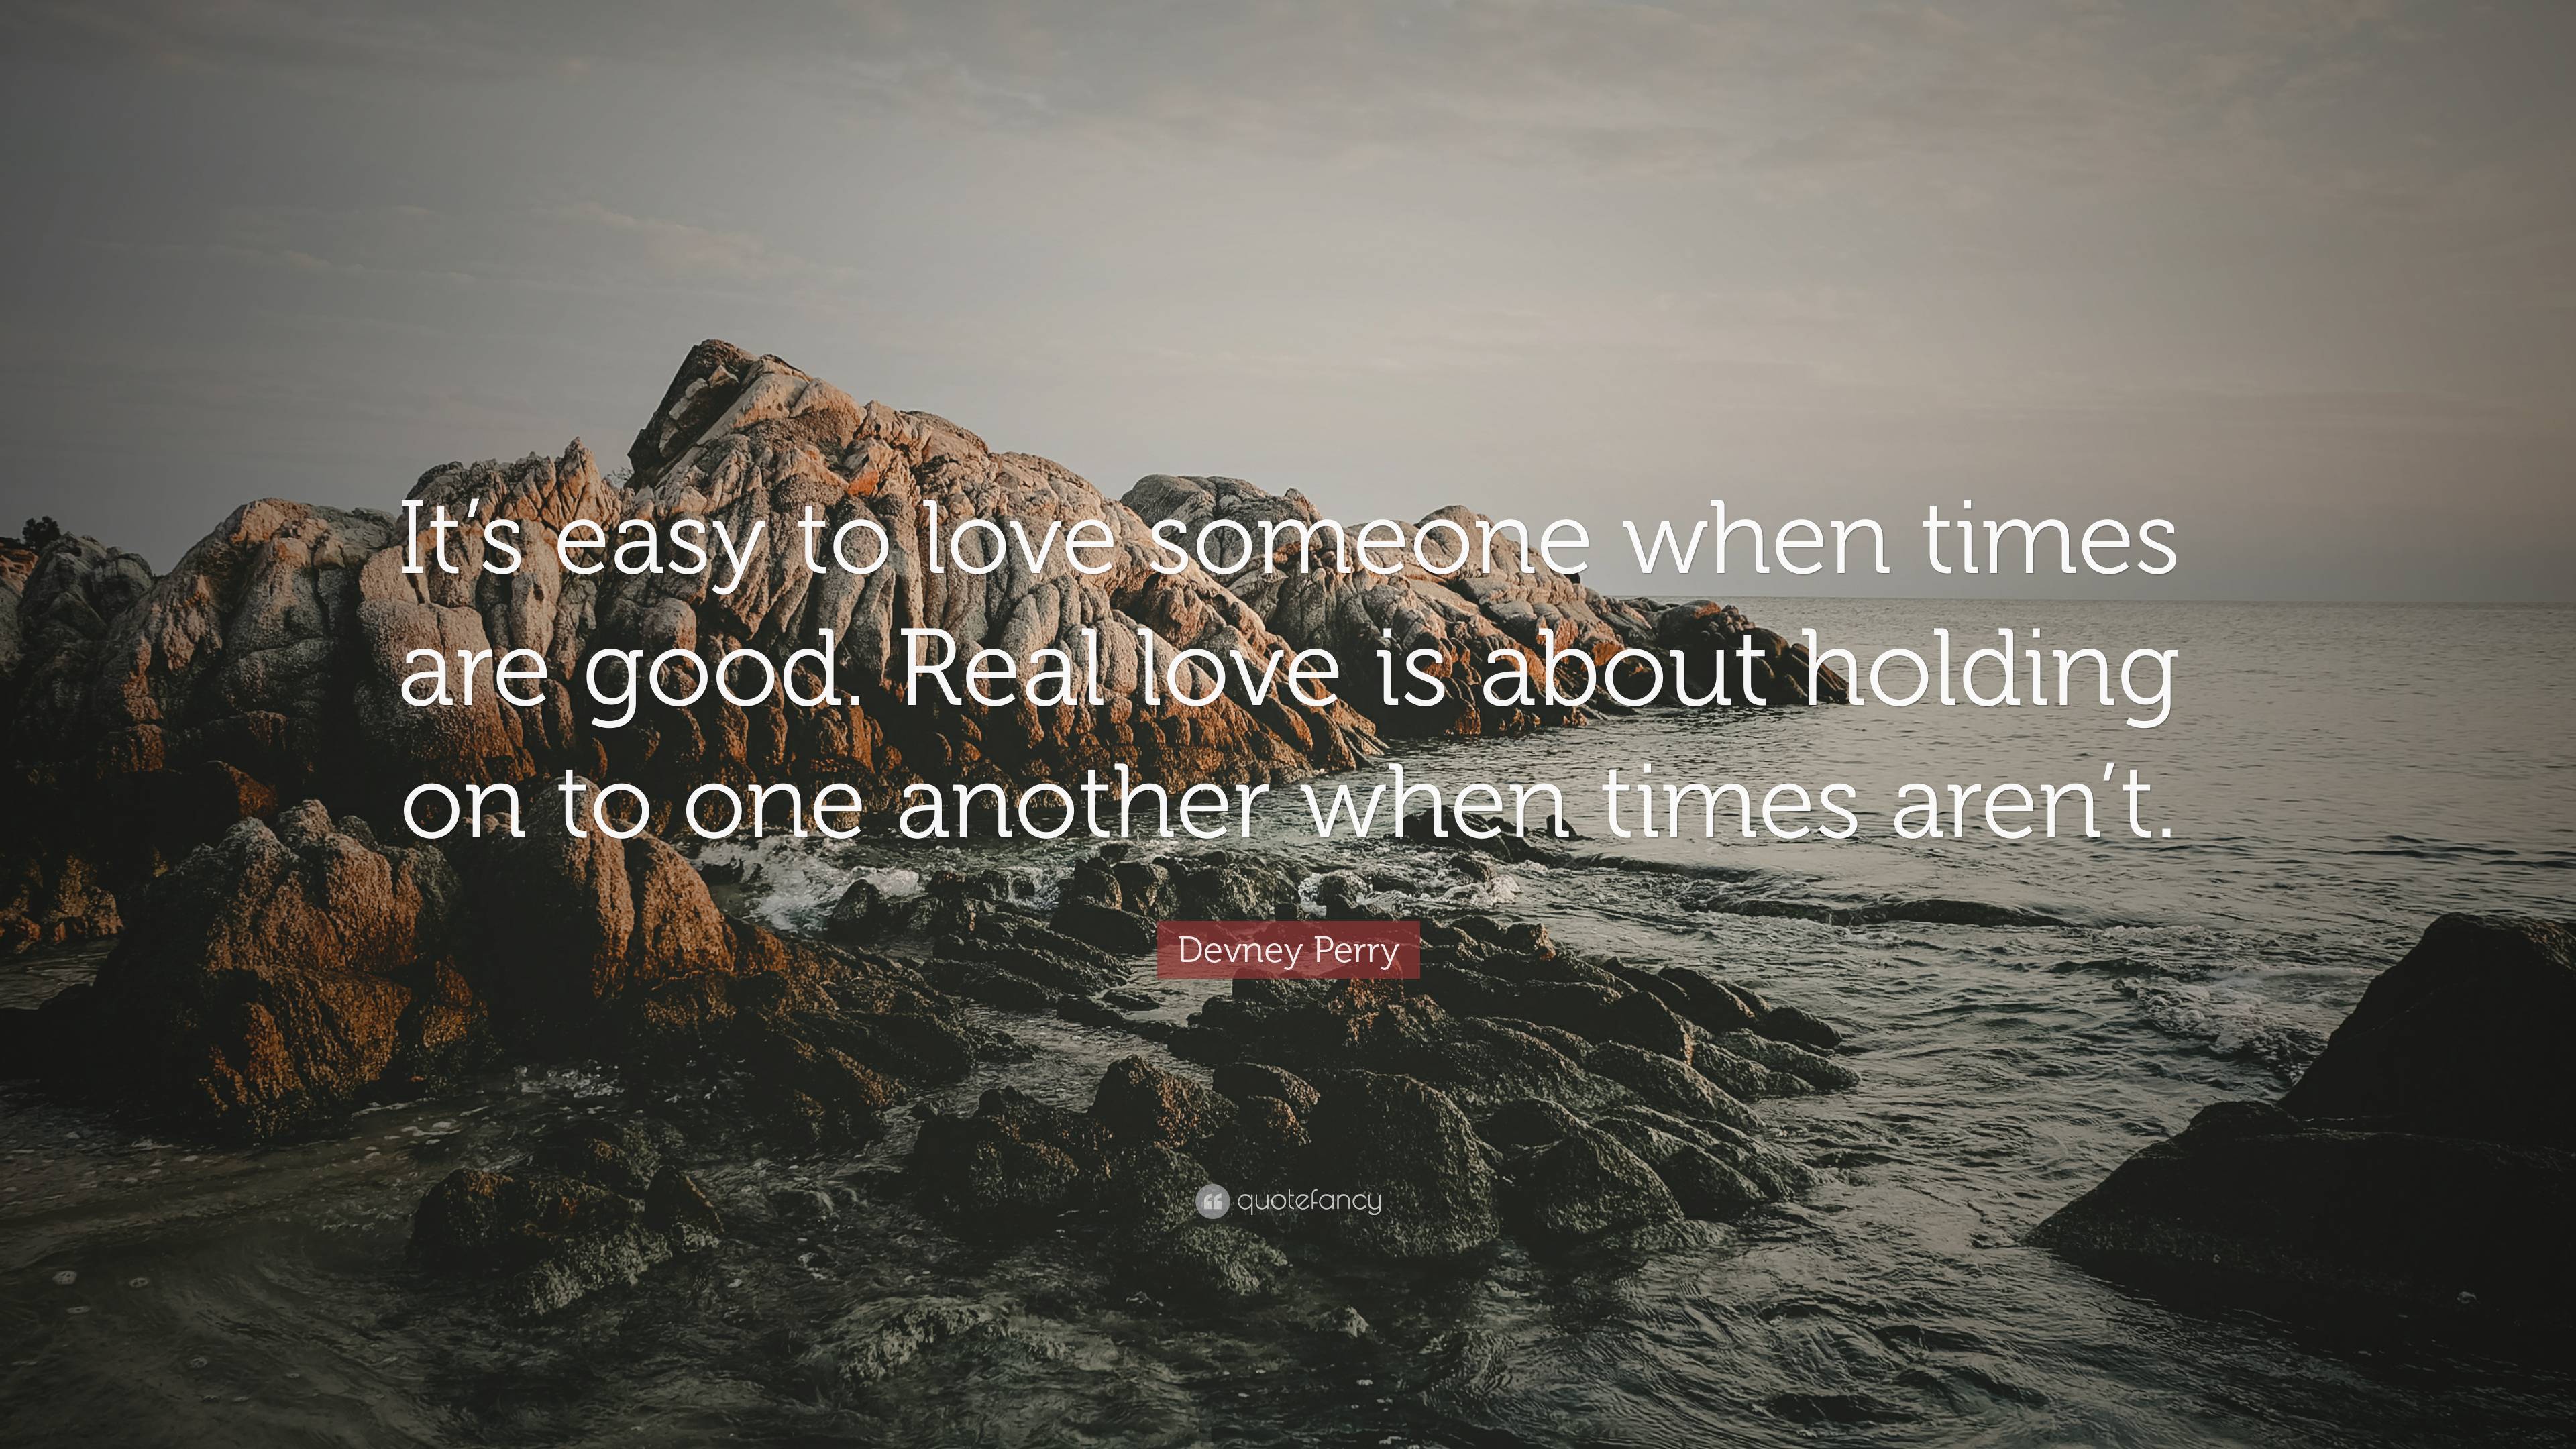 https://quotefancy.com/media/wallpaper/3840x2160/7355610-Devney-Perry-Quote-It-s-easy-to-love-someone-when-times-are-good.jpg